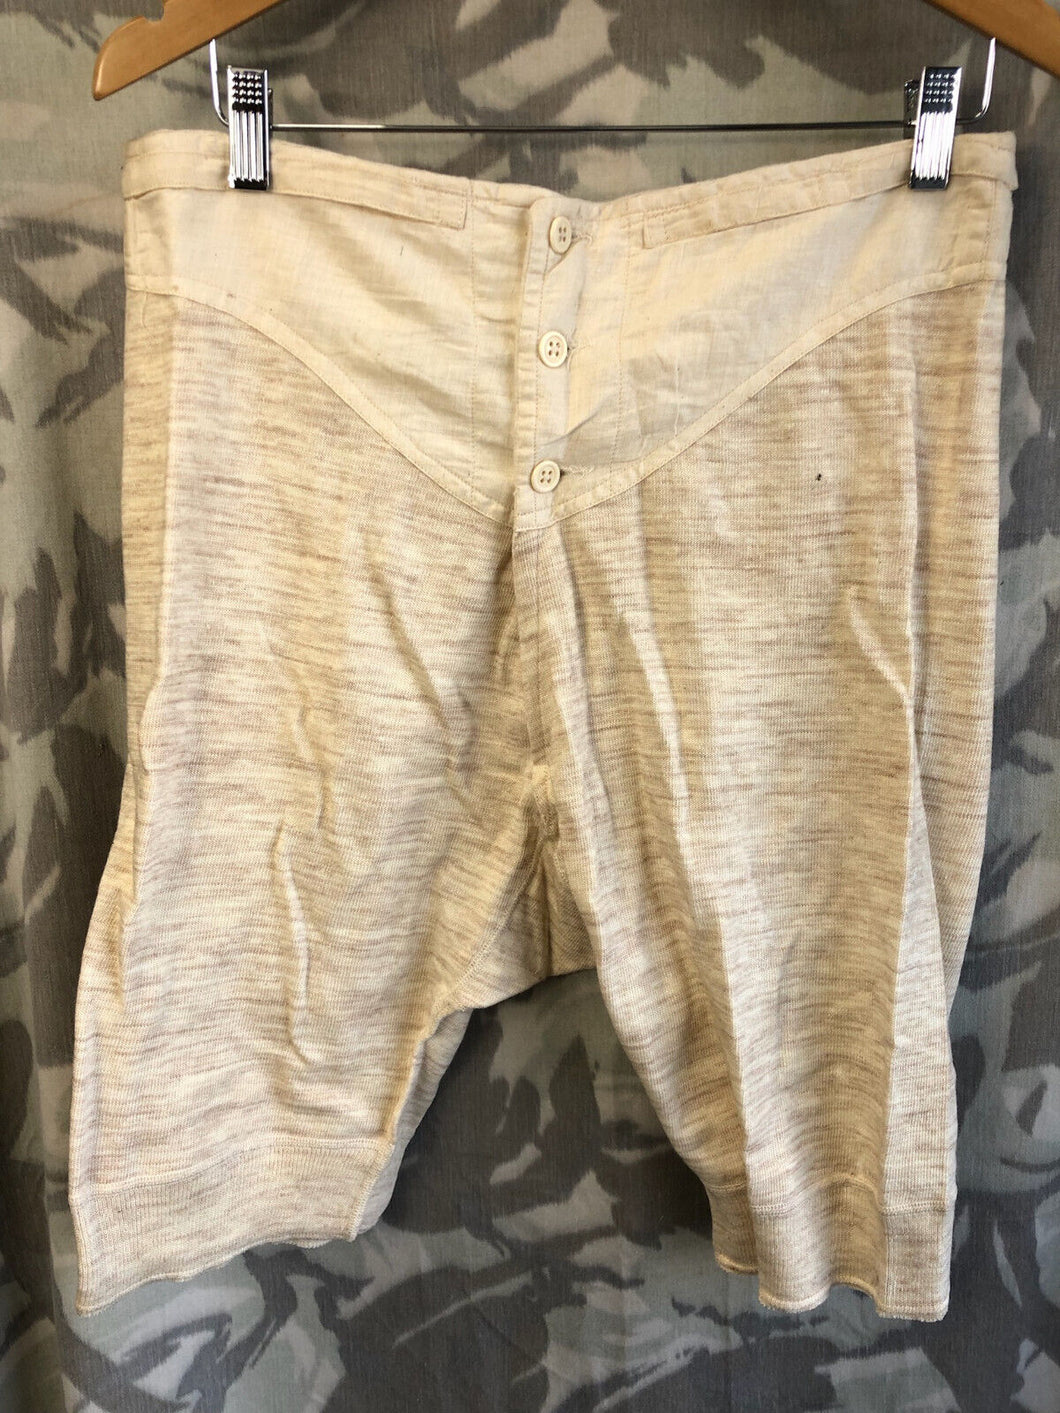 Original WW2 British Army Officers Long Johns / Shorts 1944 Dated 34